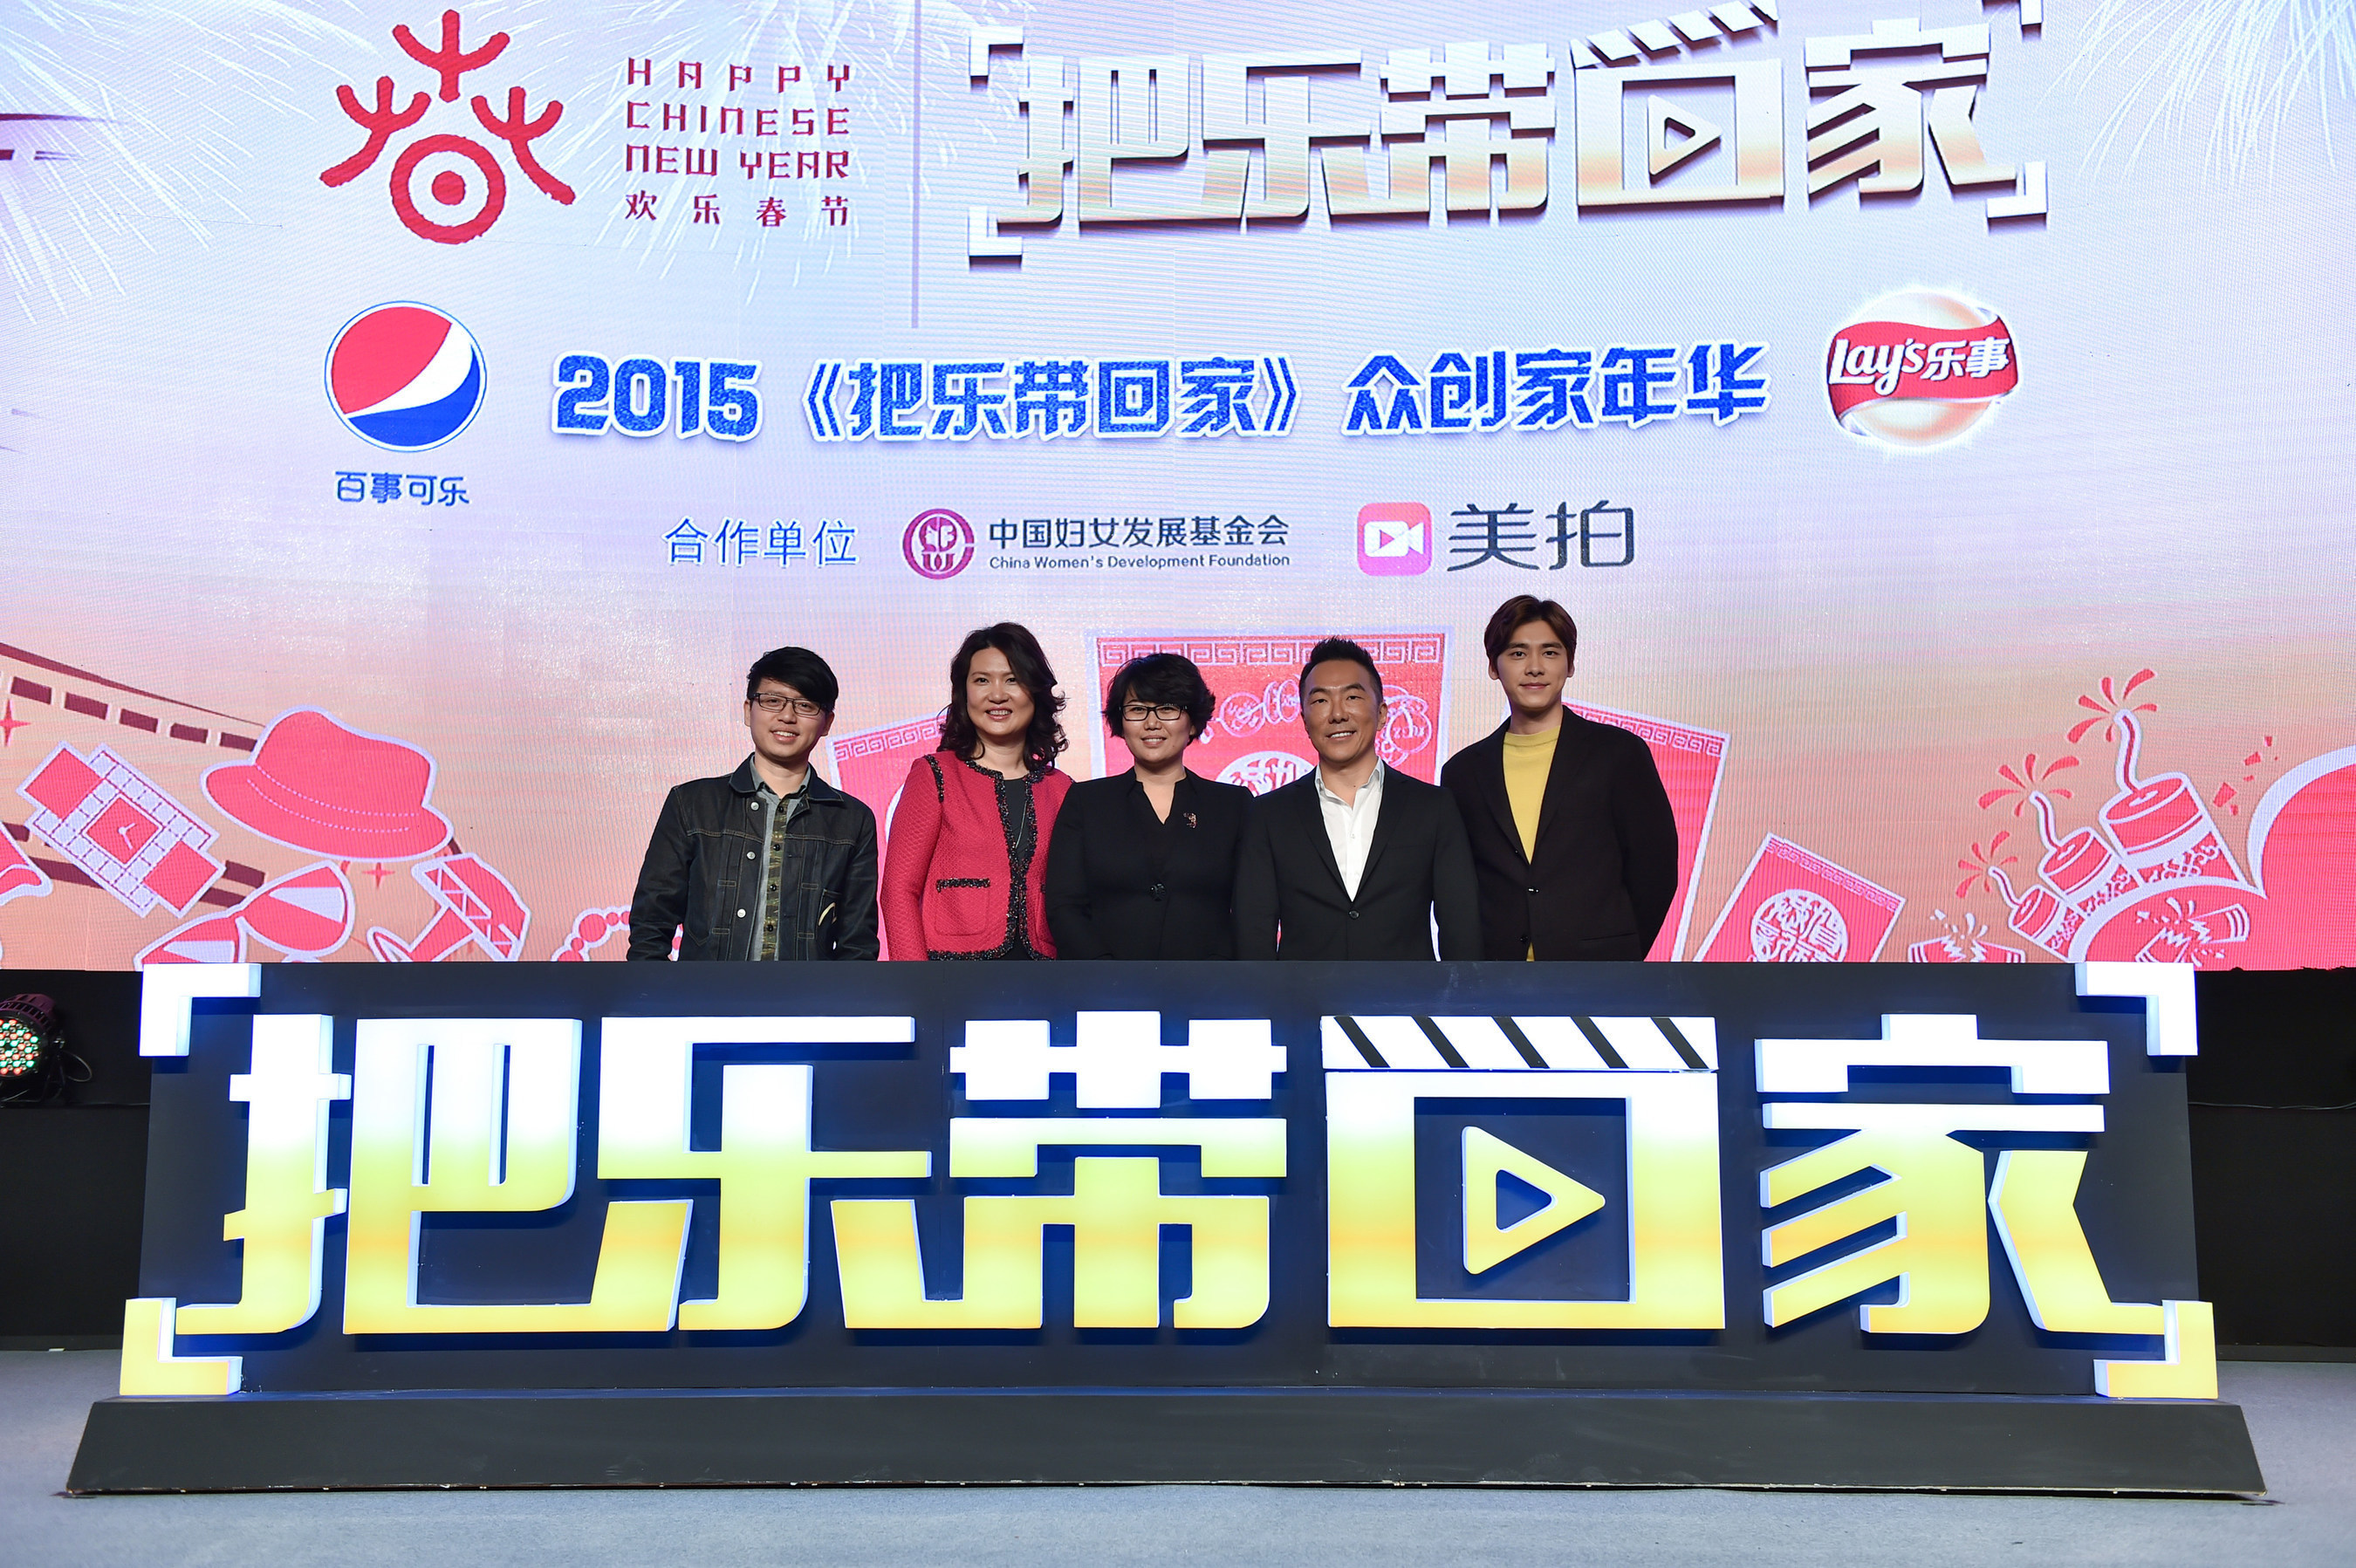 PepsiCo Launches “Happy Spring Festival - Bring Happiness Home” 2015 Campaign